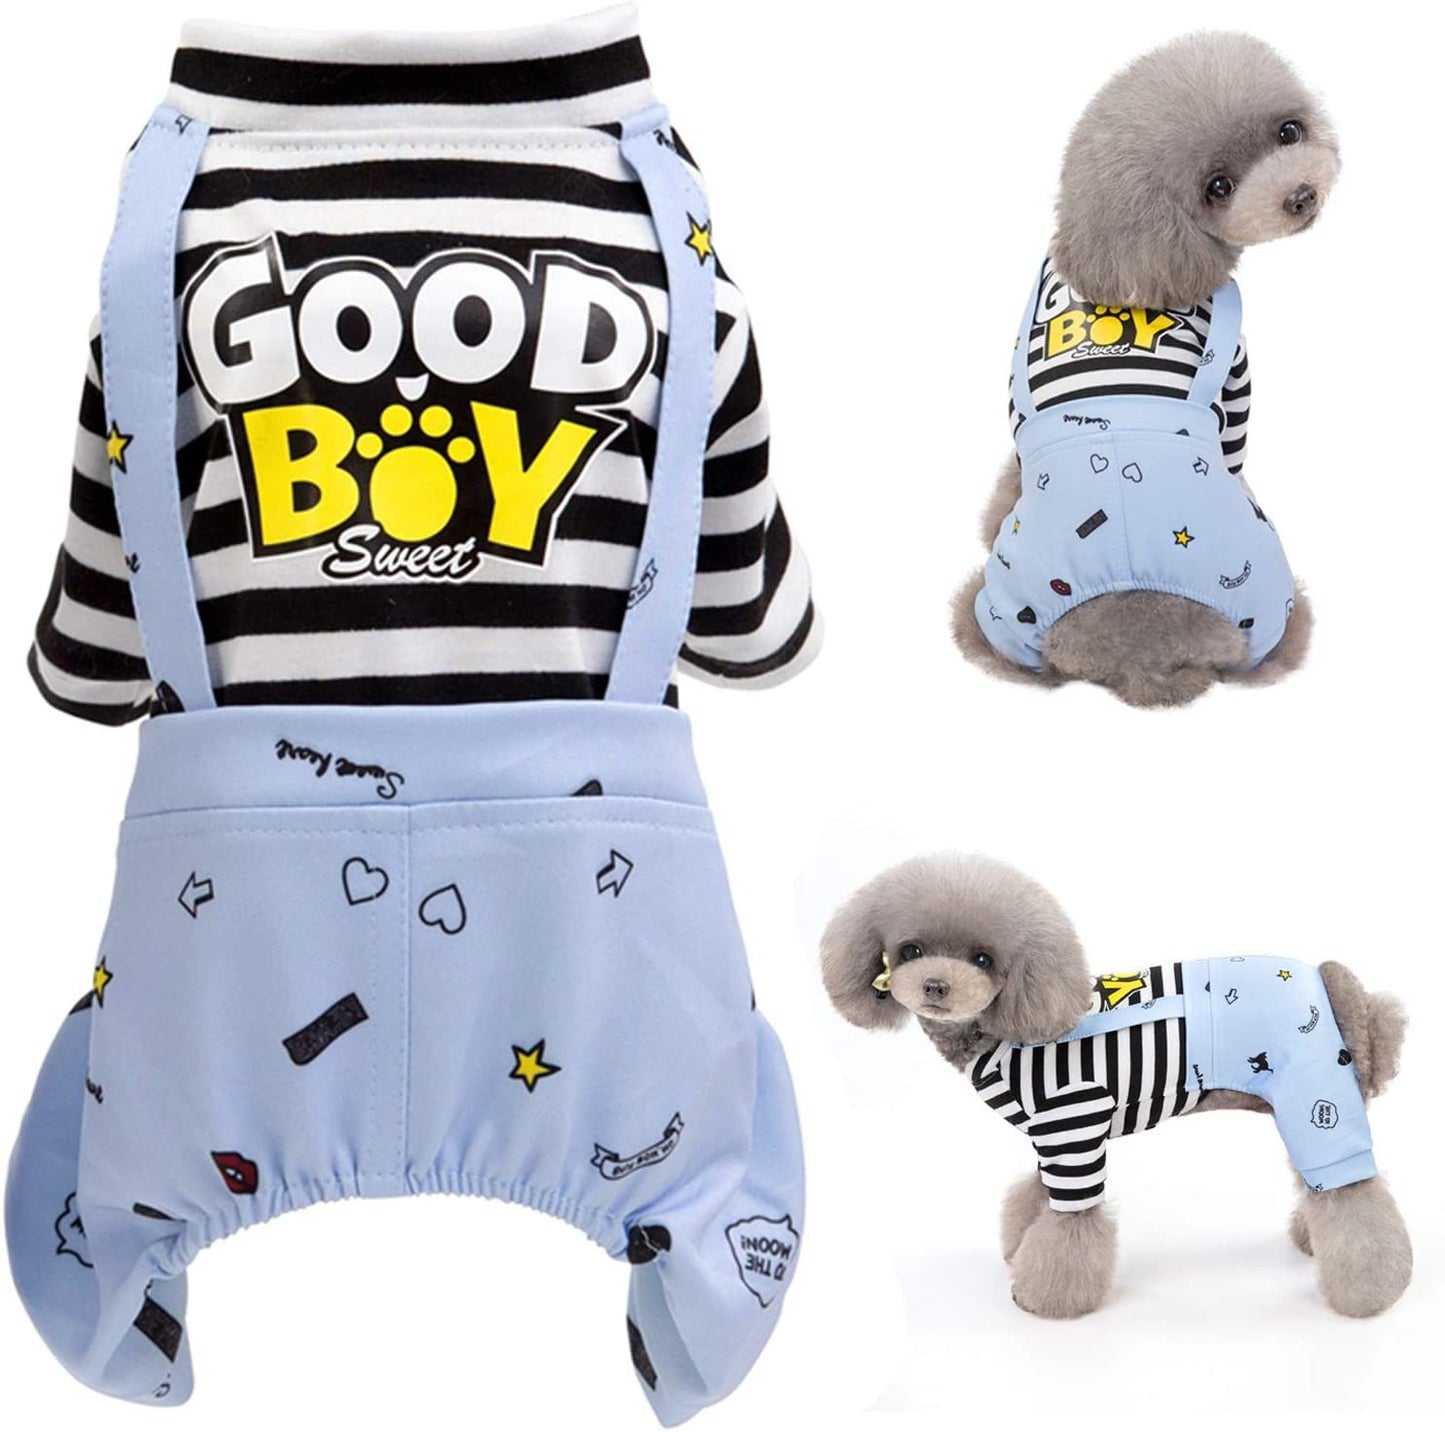 Brocarp Dog Clothes Striped Onesie Puppy Shirt, Cute Dog Pajamas Bodysuit Coat Jumpsuit Overalls Soft Comfort Pjs Apparel Costume, Dog Outfit for Small Medium Large Dogs Cats Kitten Boy Girl Animals & Pet Supplies > Pet Supplies > Dog Supplies > Dog Apparel Brocarp Blue Large 